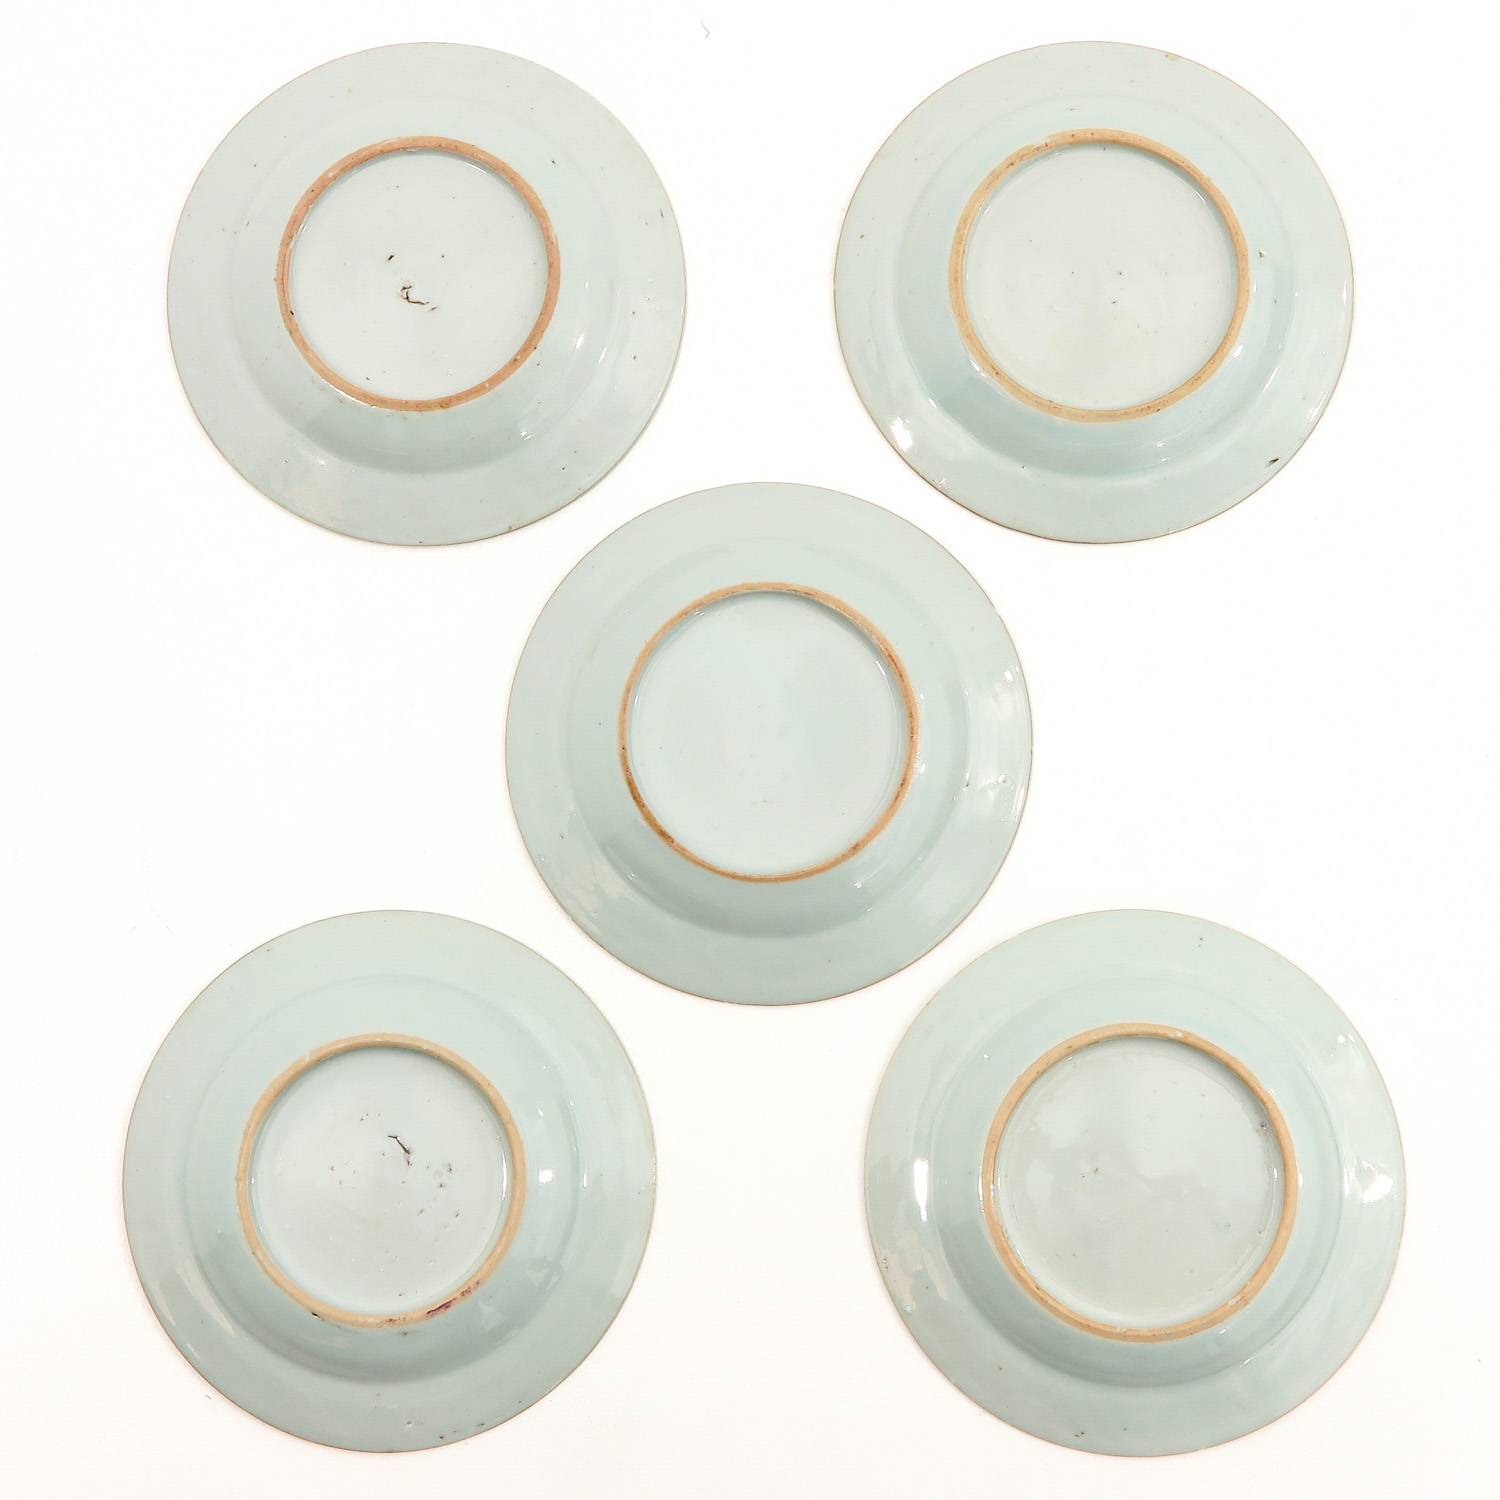 A Series of 5 Famille Rose Plates - Image 2 of 9